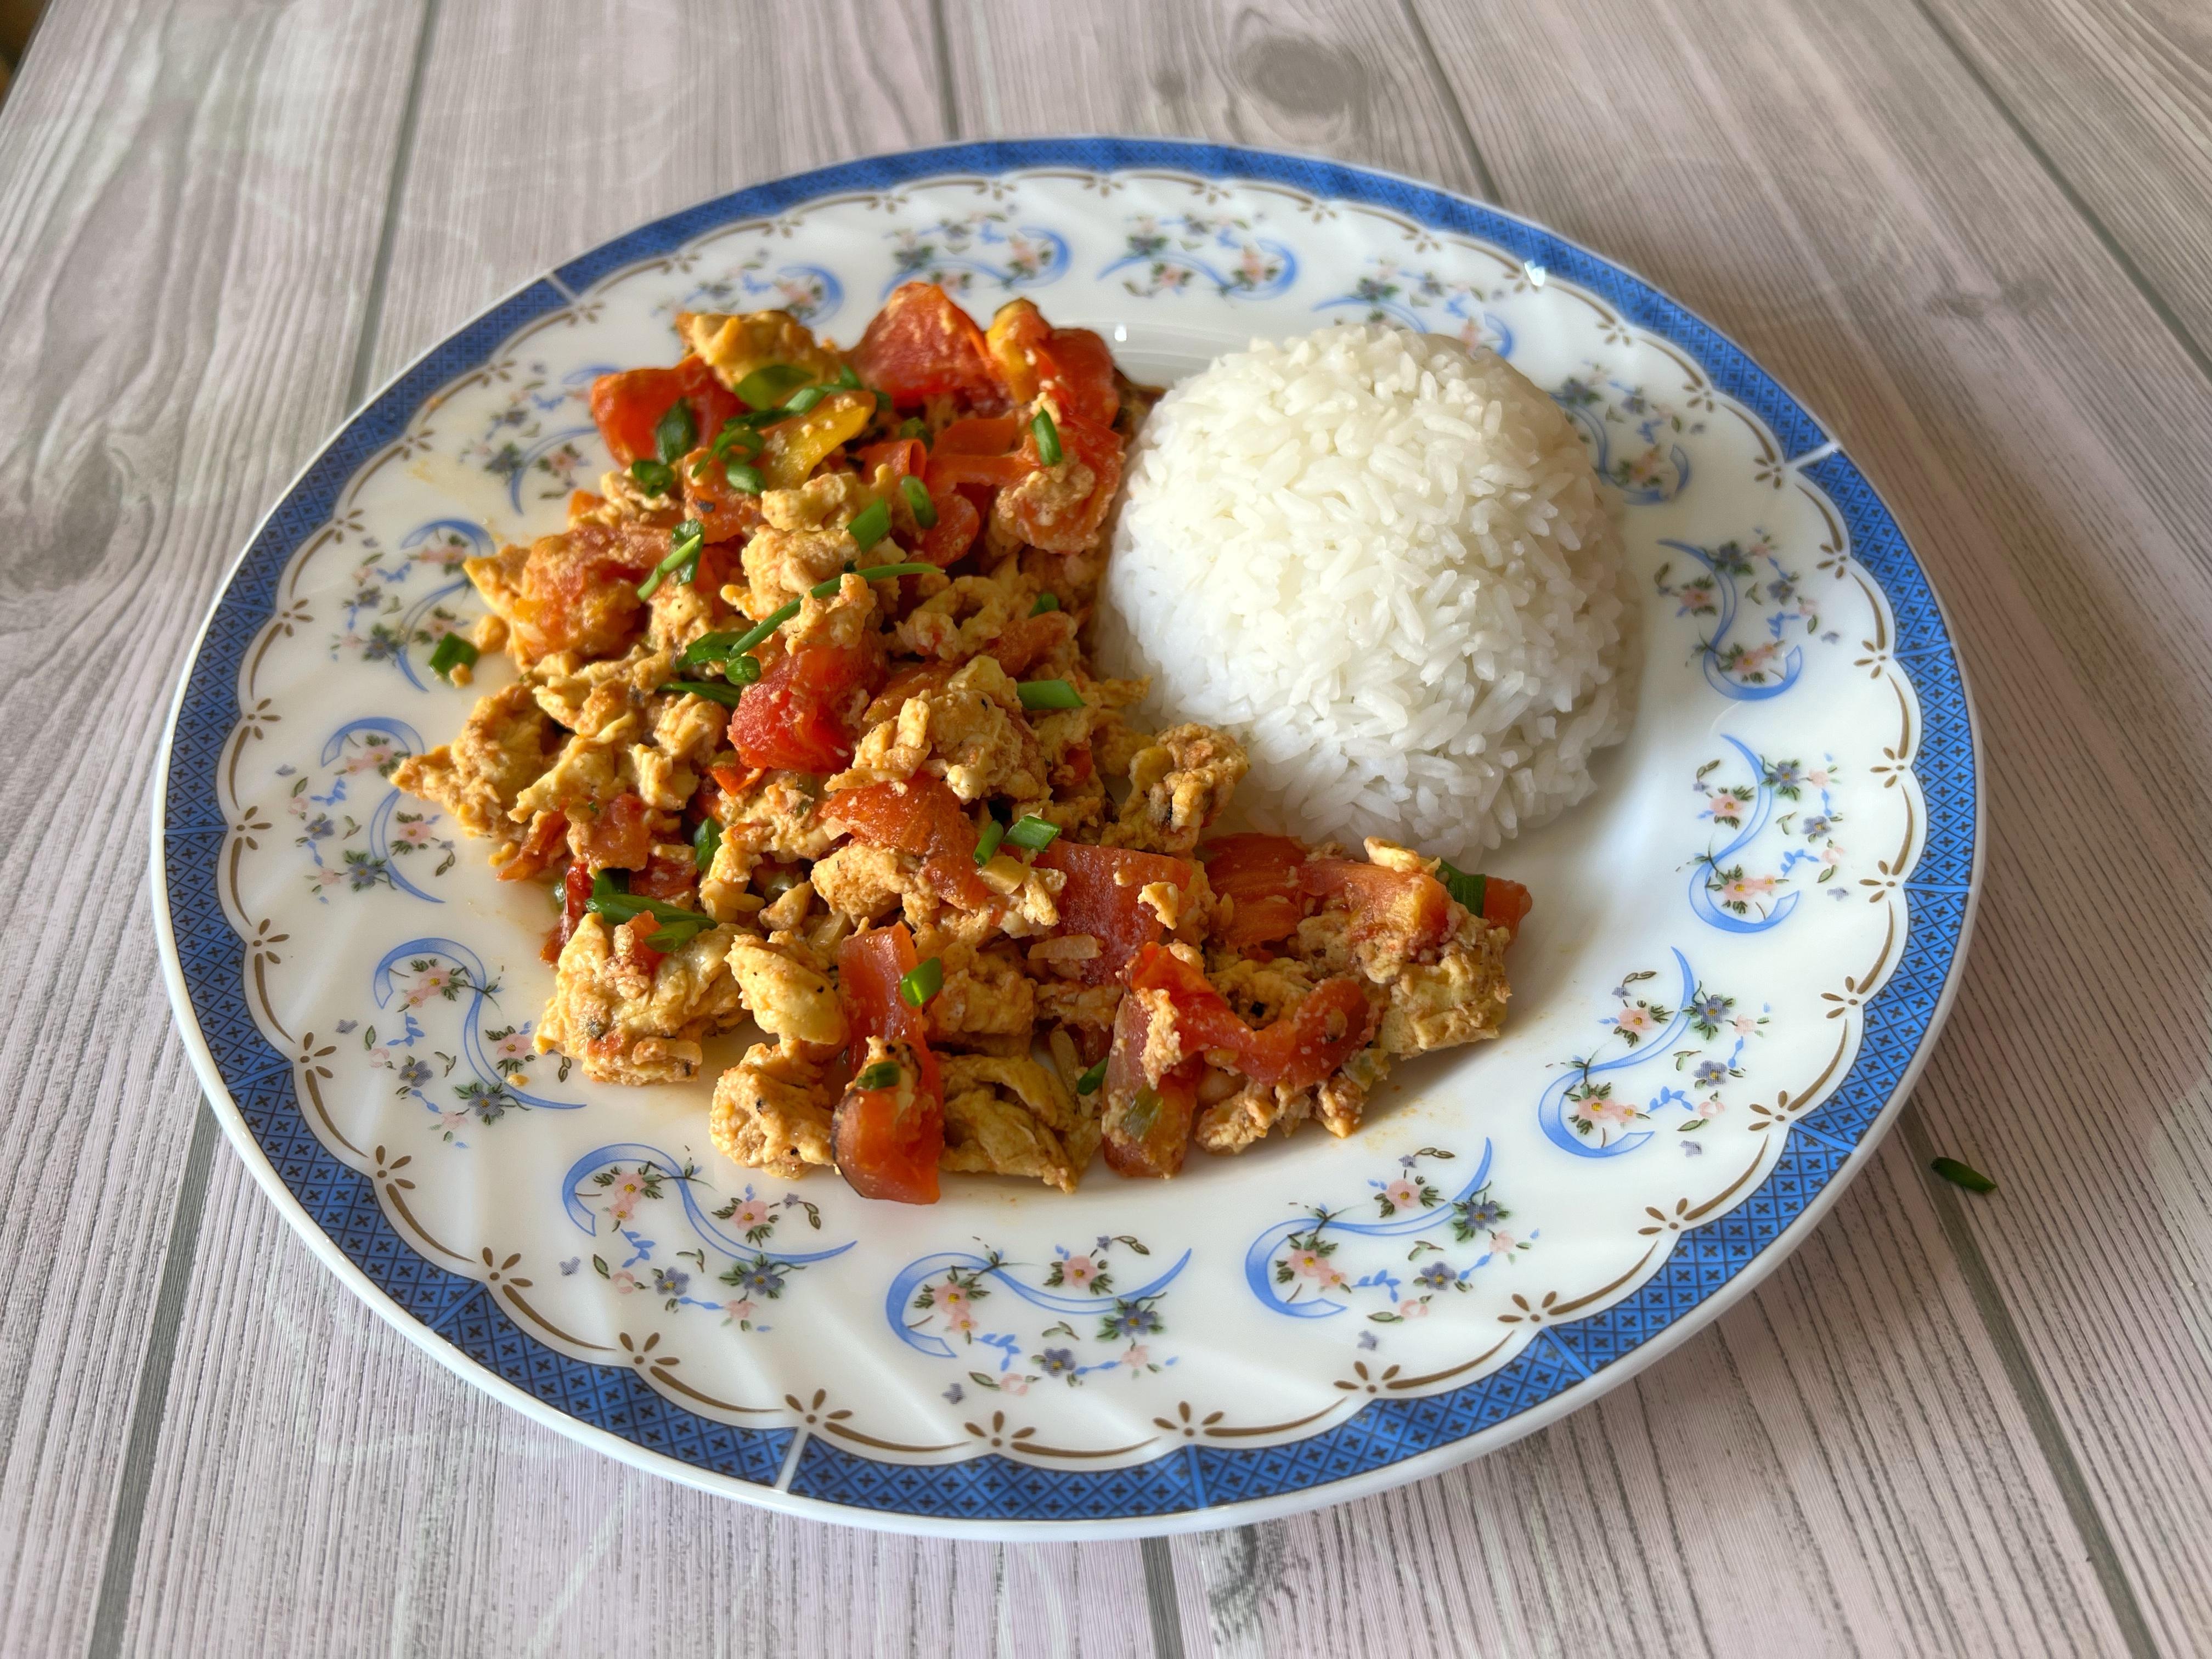 Quick & Easy Chinese Tomato Egg Stir Fry